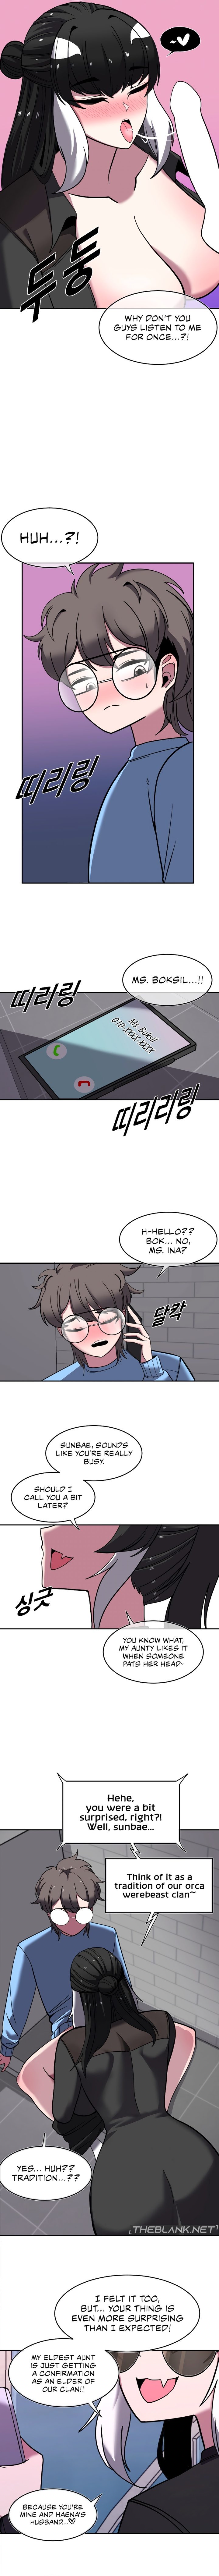 Double Life of Gukbap - Chapter 11 Page 2